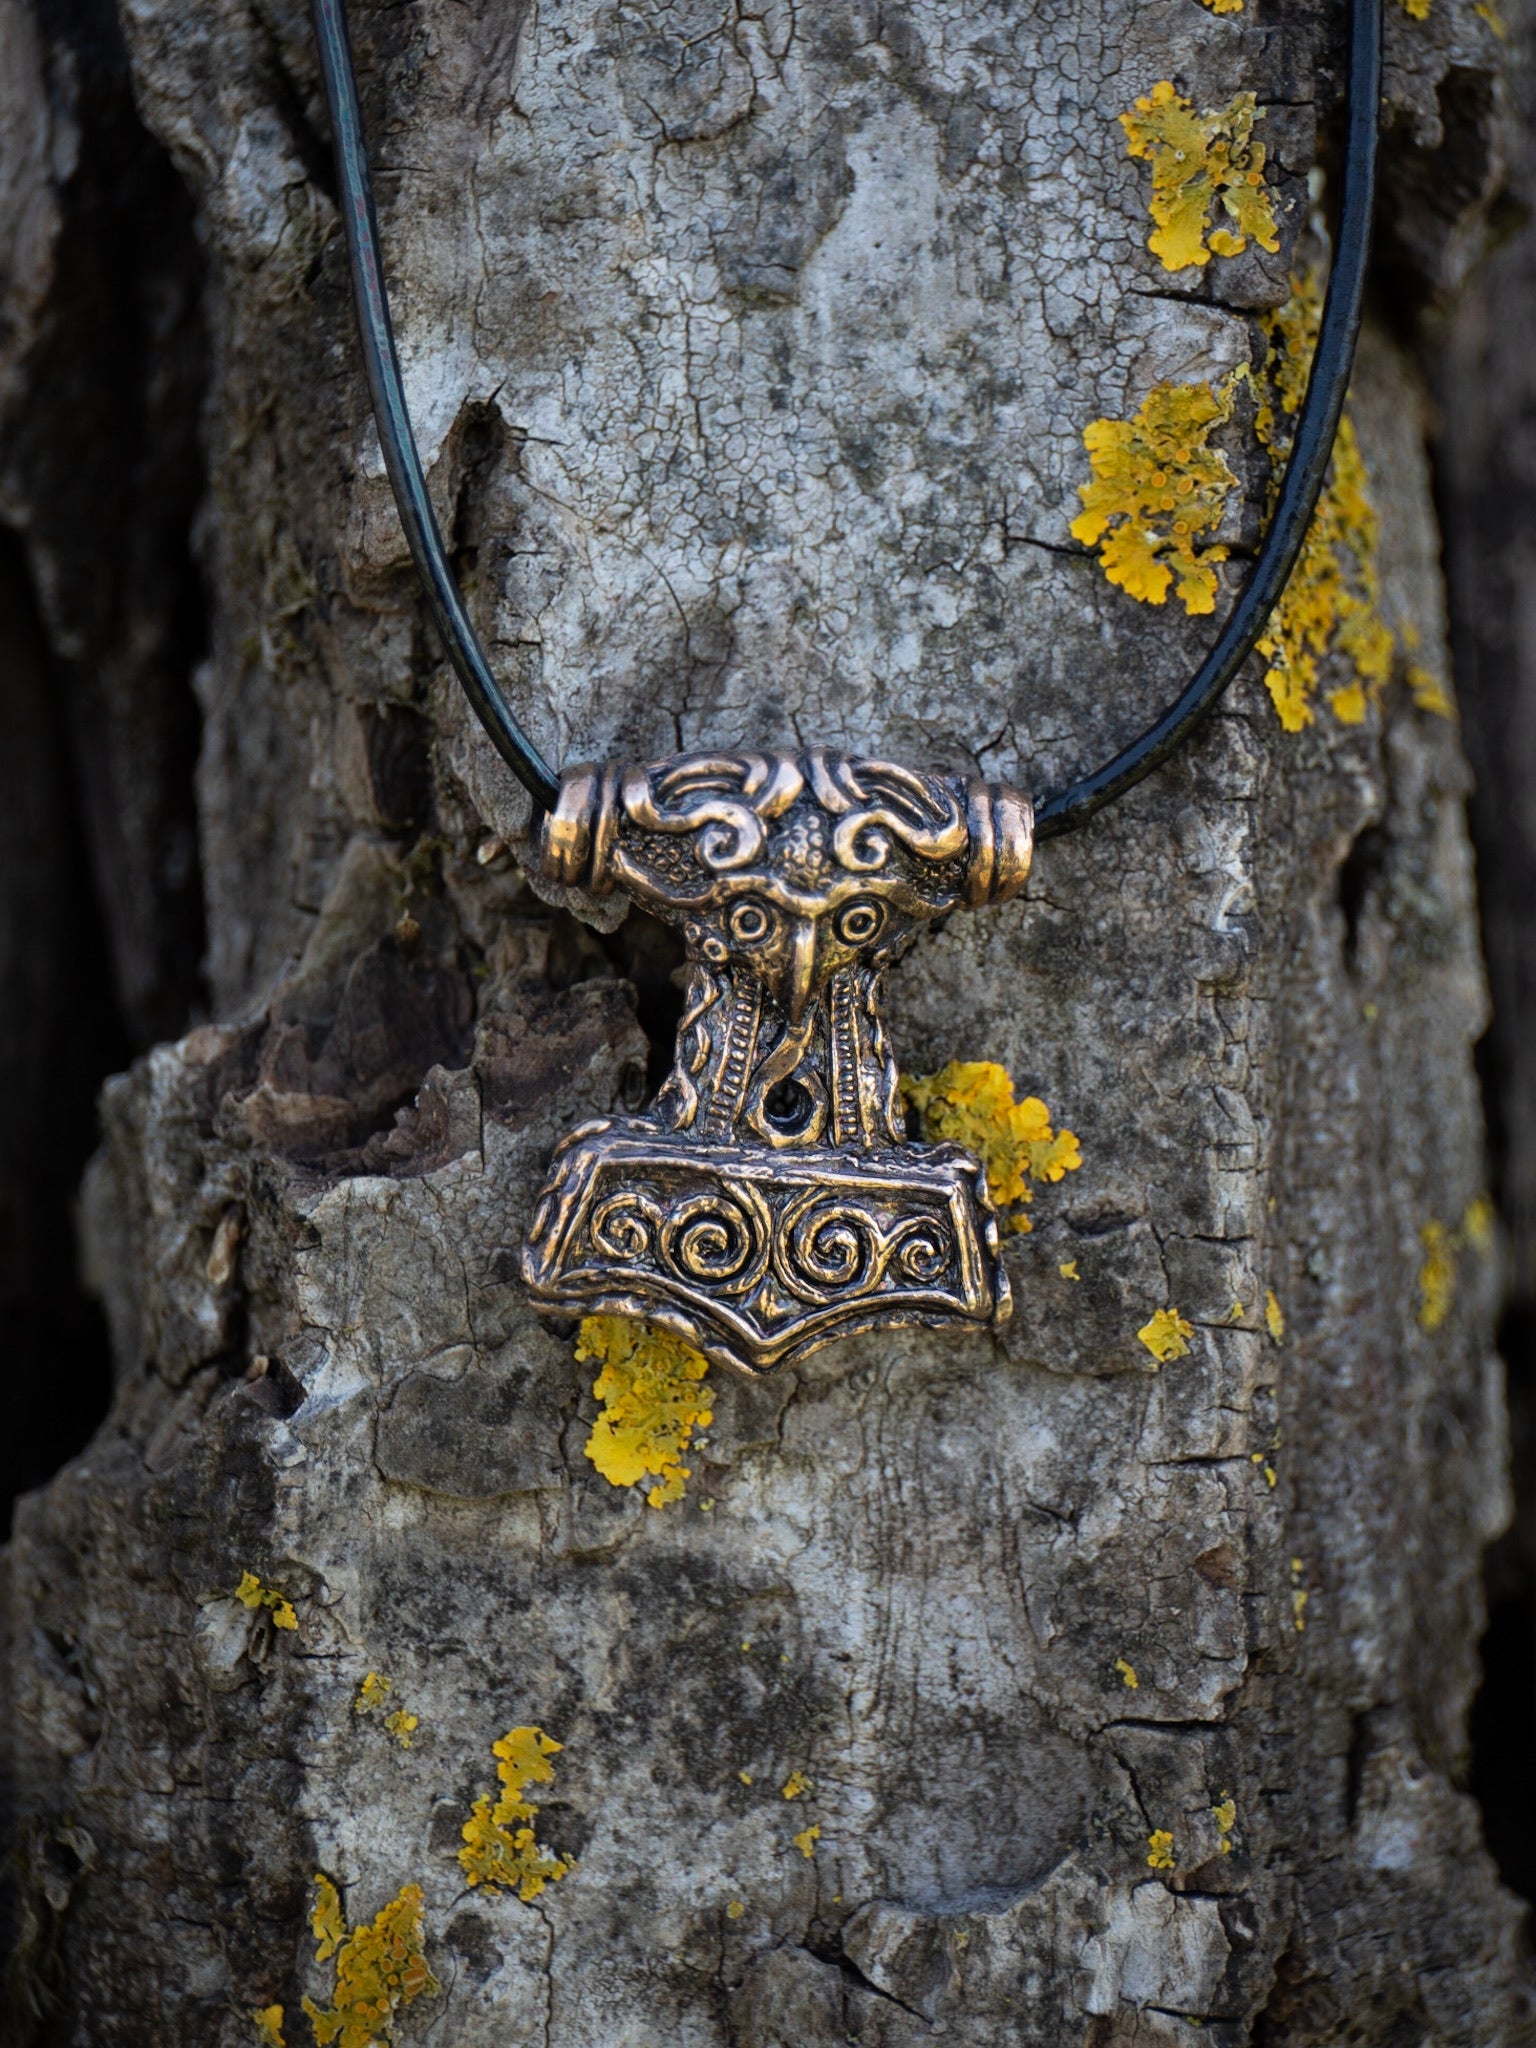 Bronze Mjolnir, Descended from Odin, Wanderers Warriors,Organic T-shirts, Staithes Hoodie, Merino Wool Hoodie, Odin, TYR, Thor, Ragnar, Bjorn Ironside, Vikings, Anglo Saxon, Norse, Fitness Gear, Horns, Jewellery, Silver